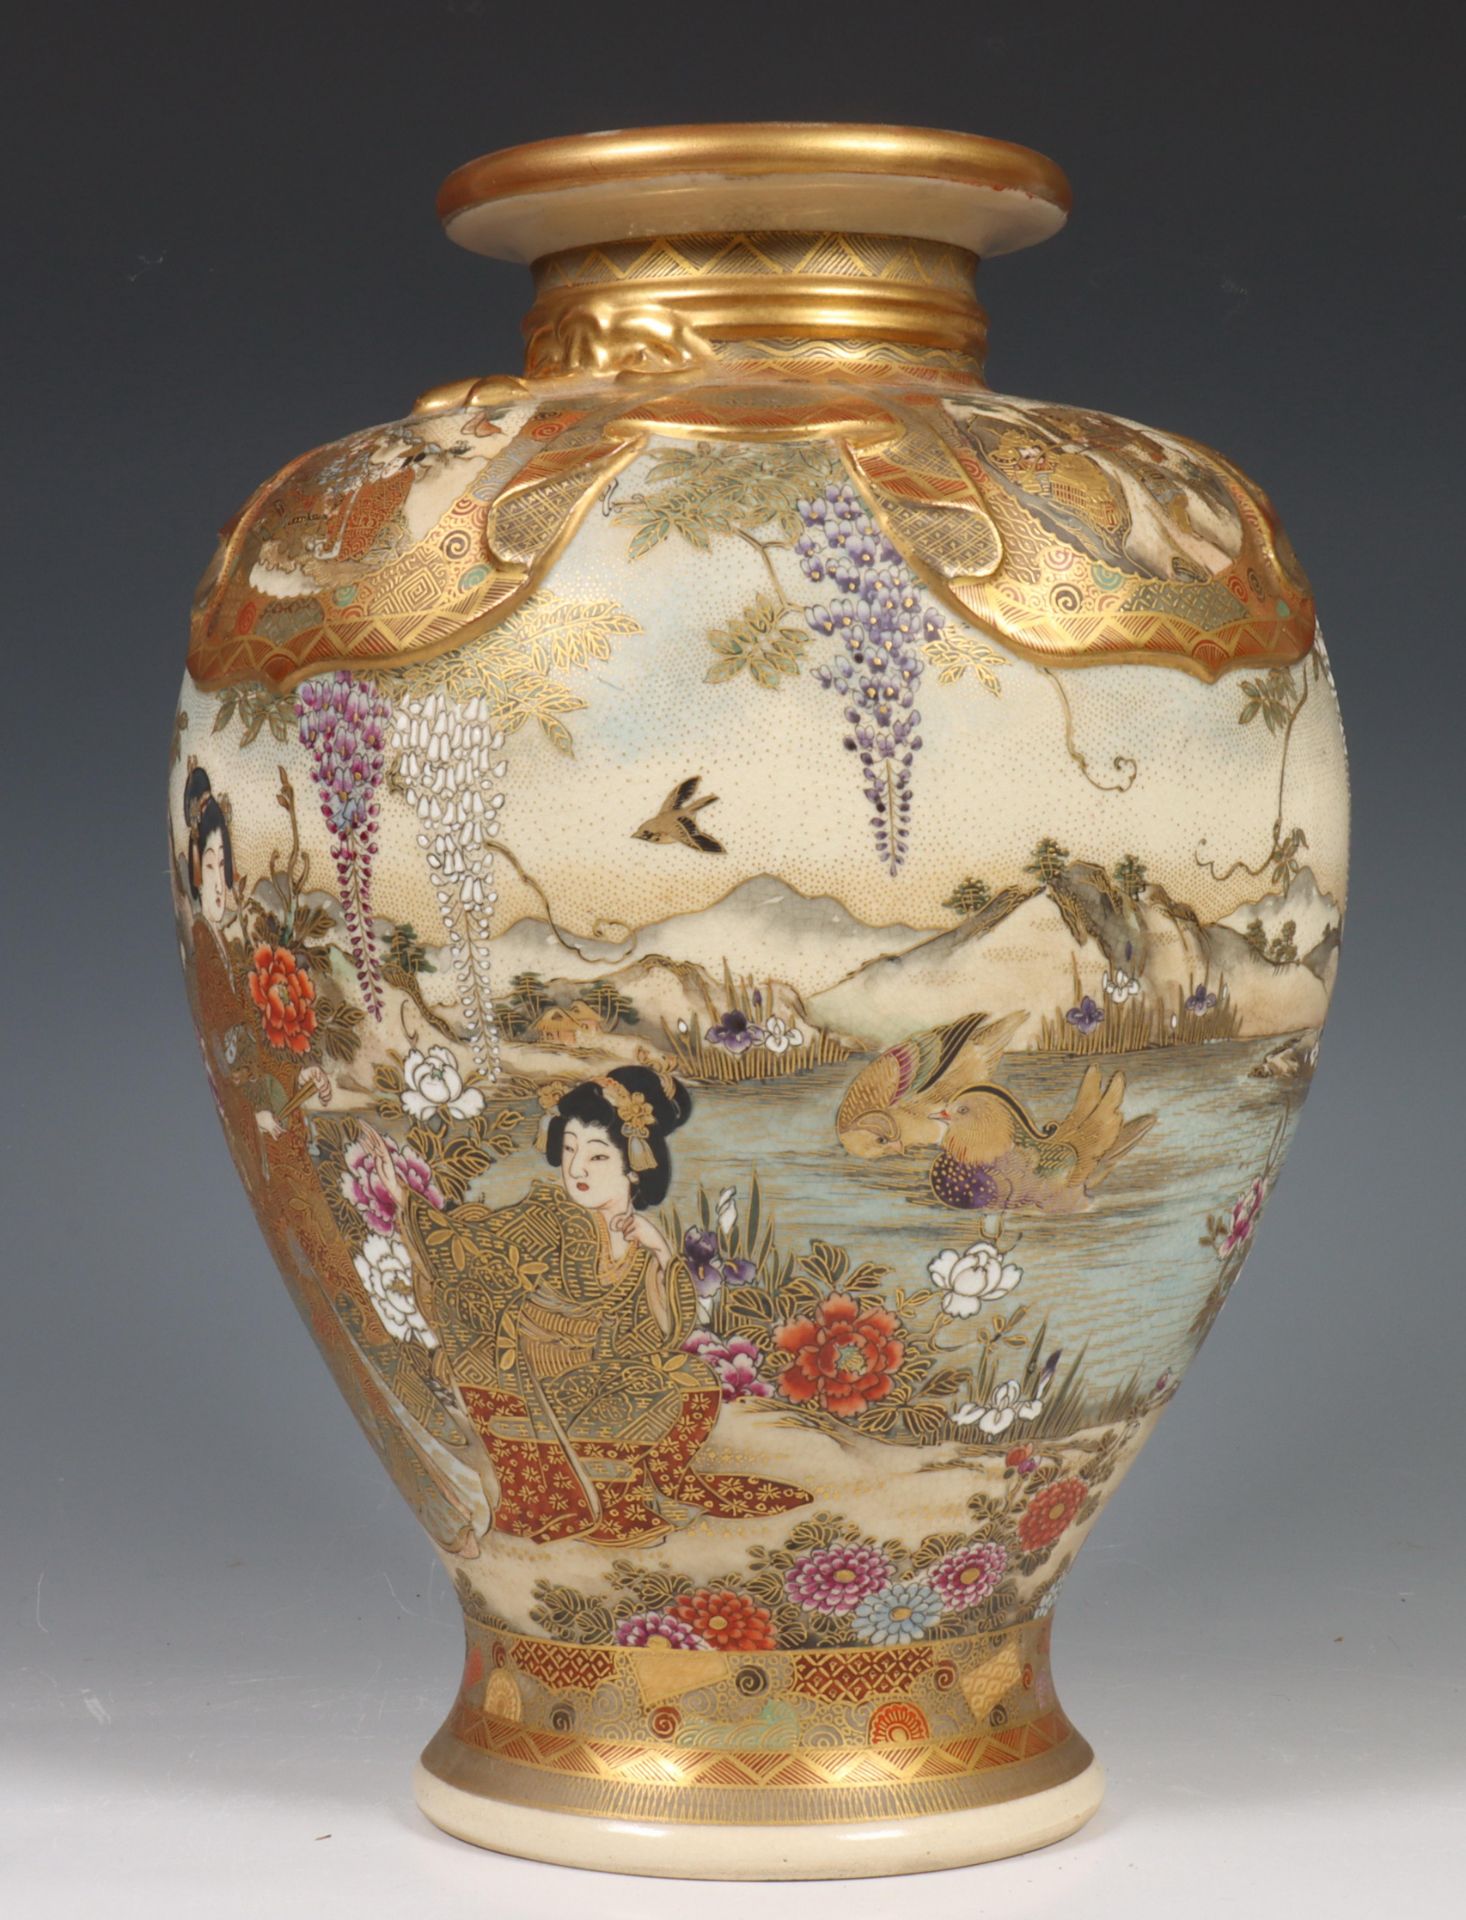 Japan, Satsuma porcelain vase, late 19th century, decorated with elegant ladies in a flower garden - Image 3 of 10